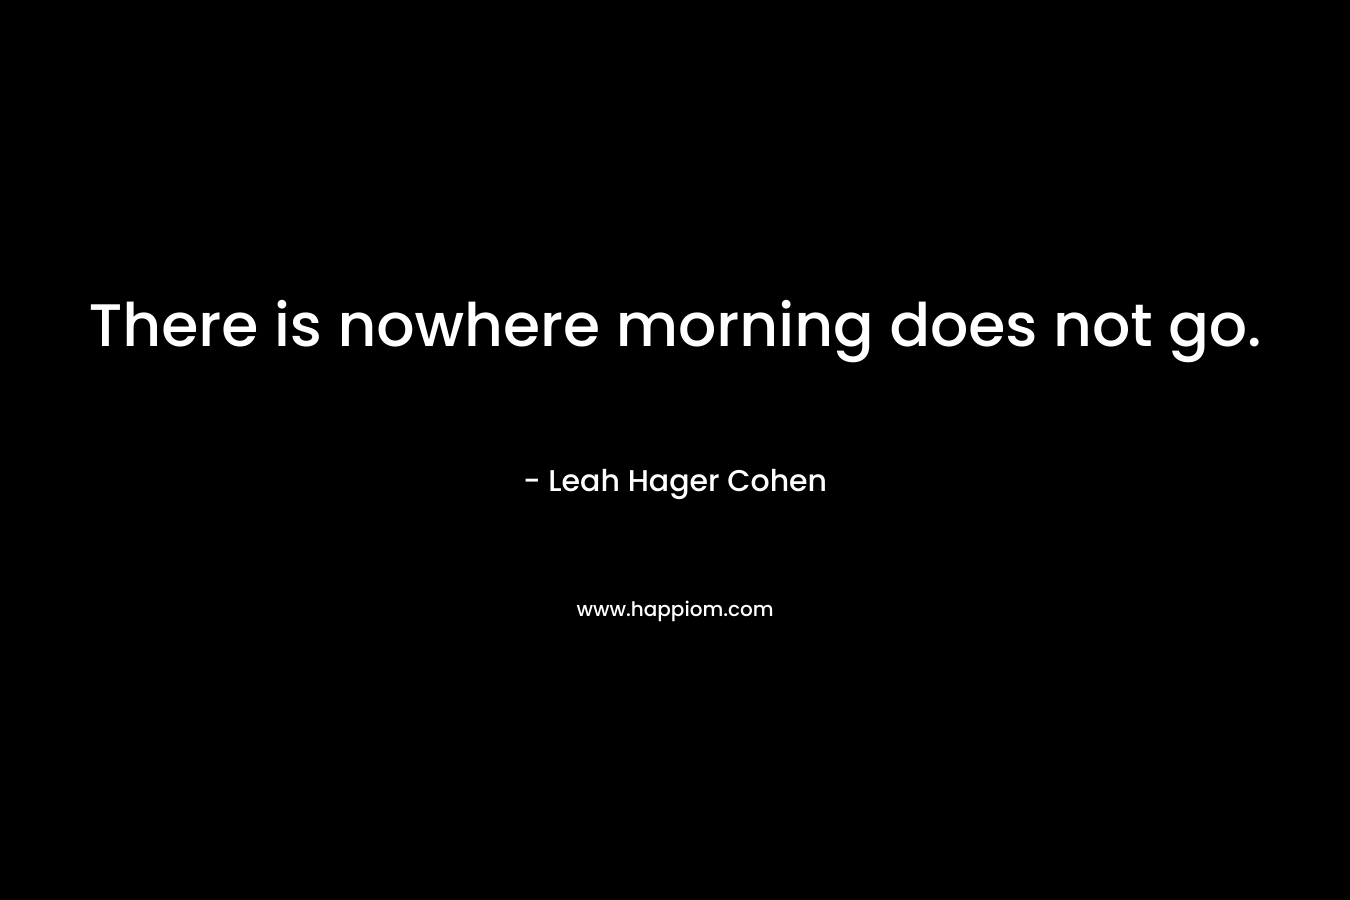 There is nowhere morning does not go.